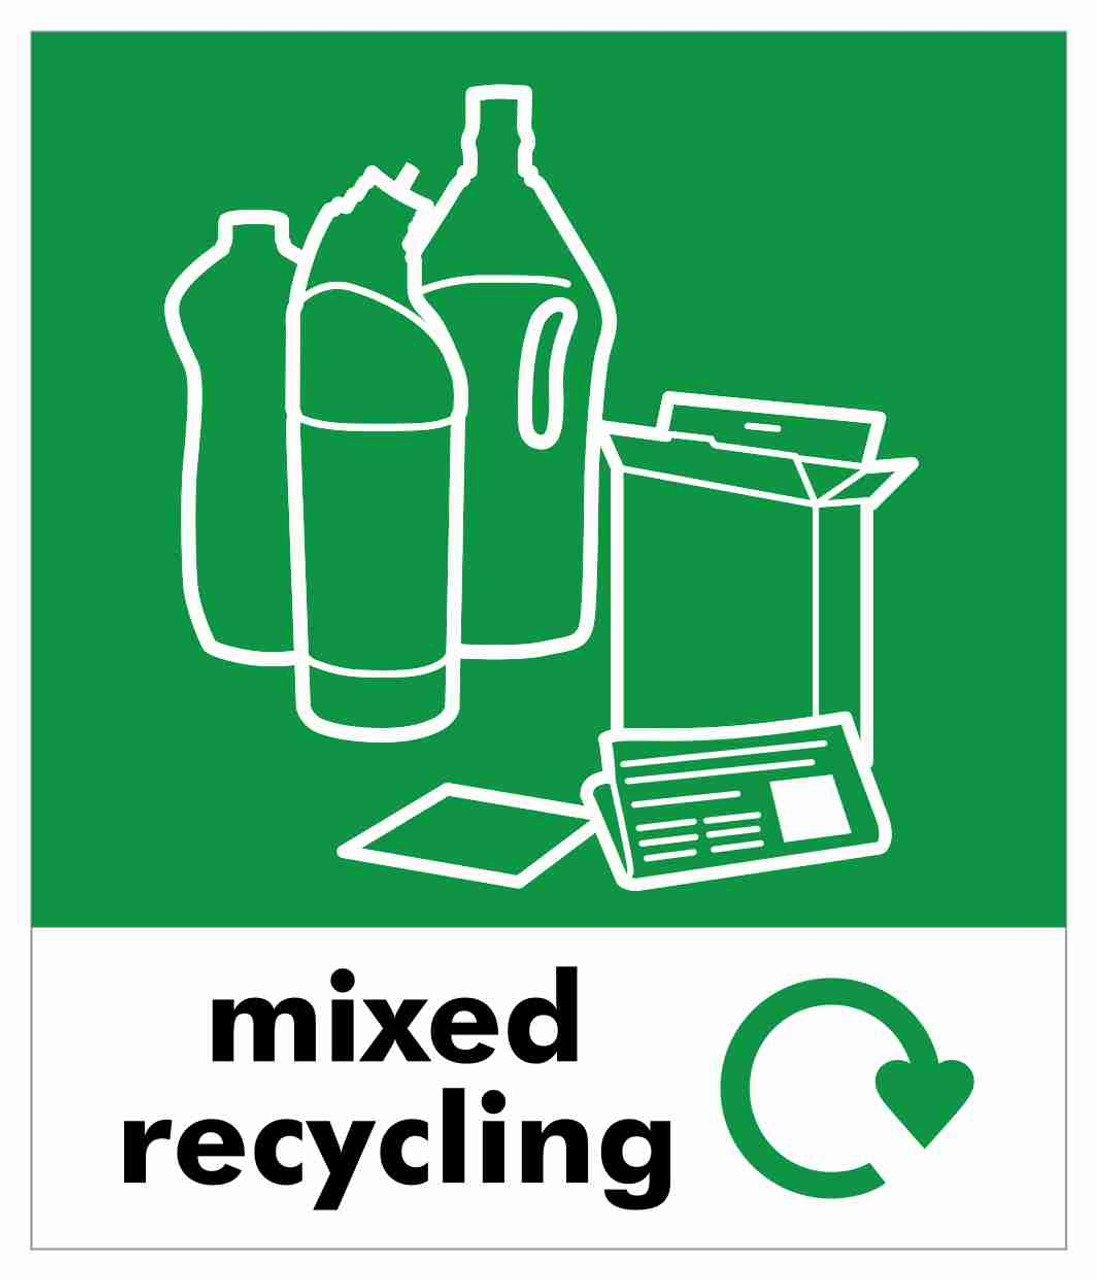 PC85MR - A small square sticker with white outline of paper, bottles, cans & cardboard situated on green background, featuring recycling logo & mixed recycling text